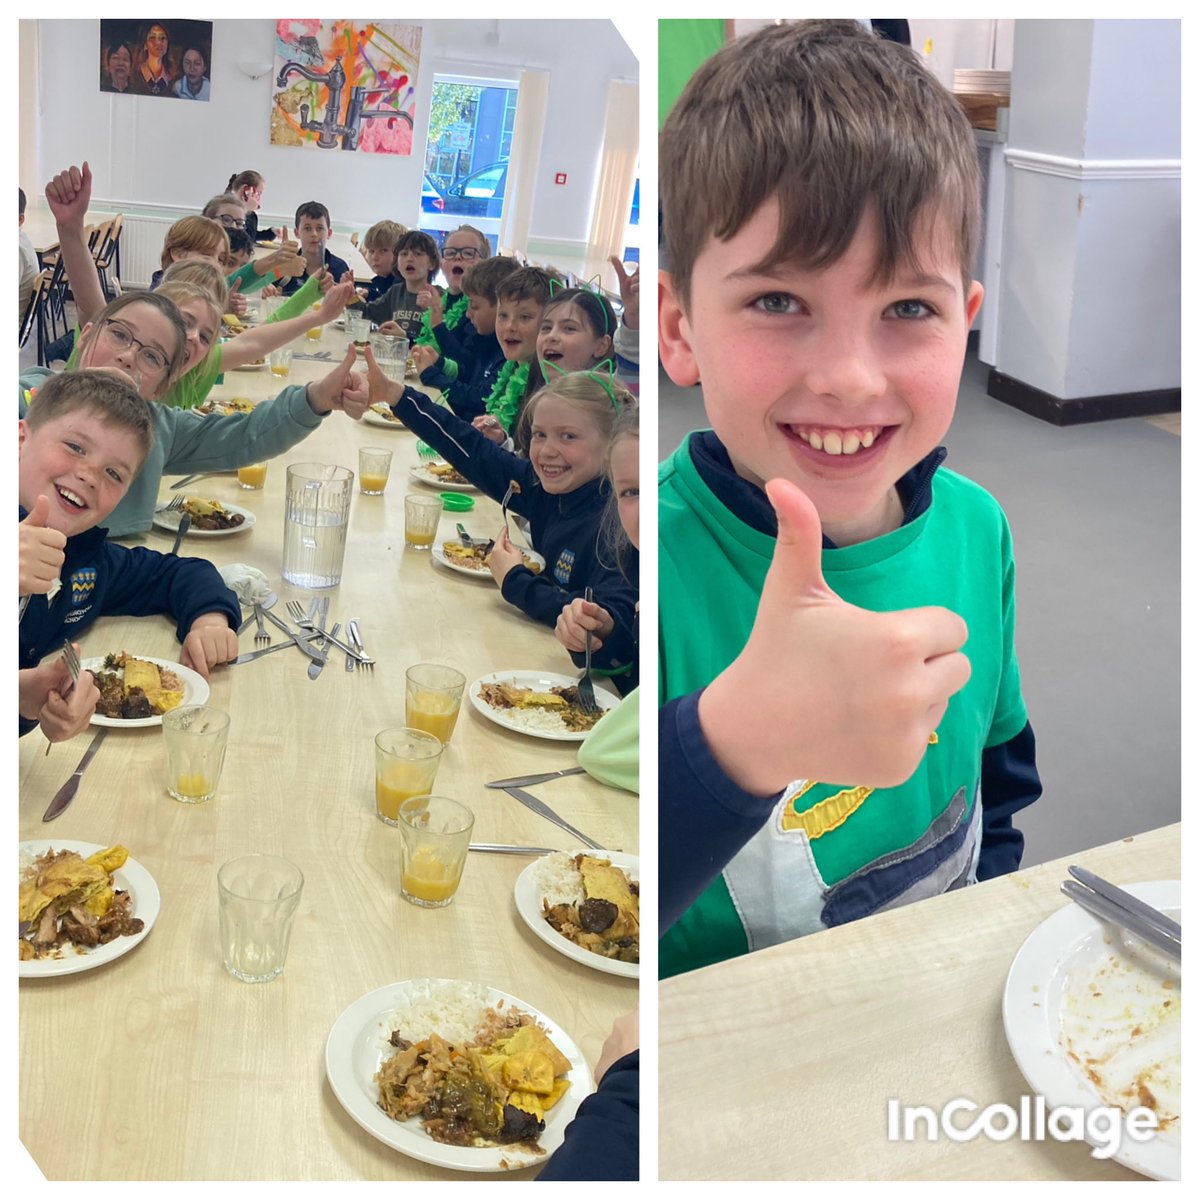 Caribbean food tasters for year 5 of @PockPrep today. The students were very adventurous about trying the different dishes after learning in lessons about Jamaica, the Caribbean and Windrush. Learning is fun, and tasty here at @PockSchool 🇯🇲🥘